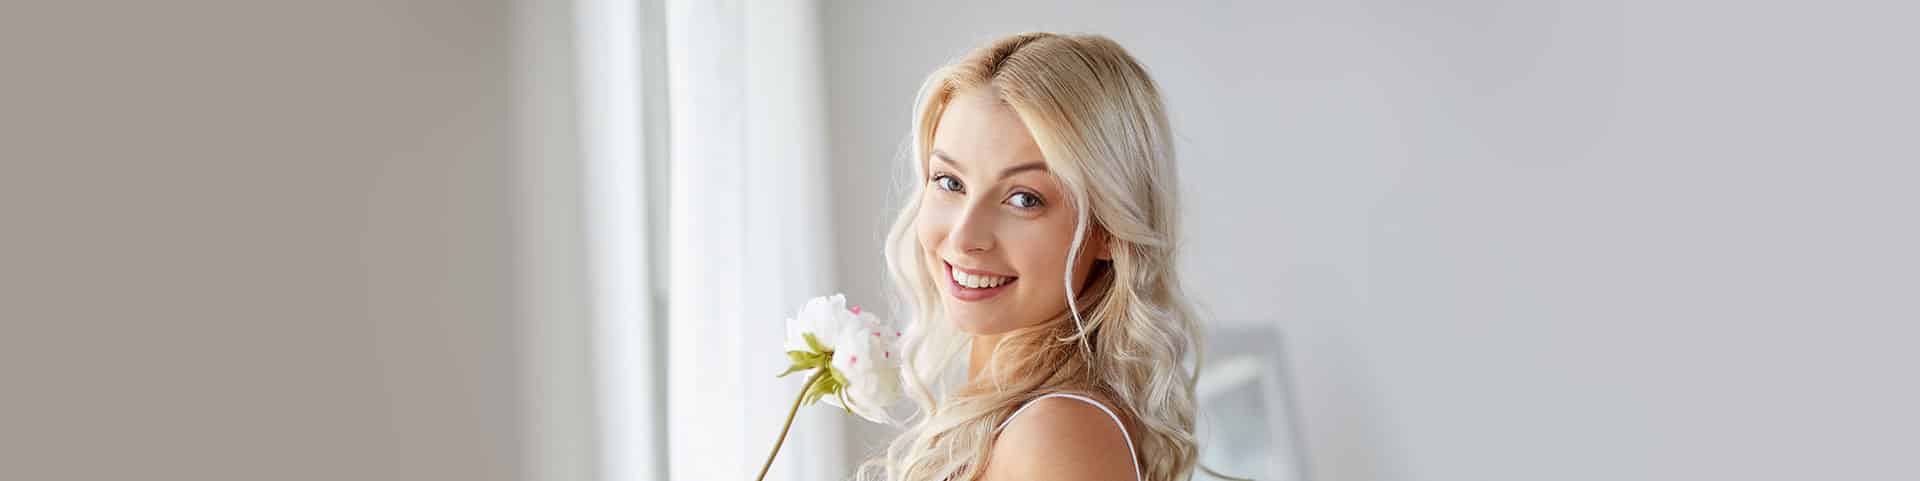 Blonde woman with flower smilling.